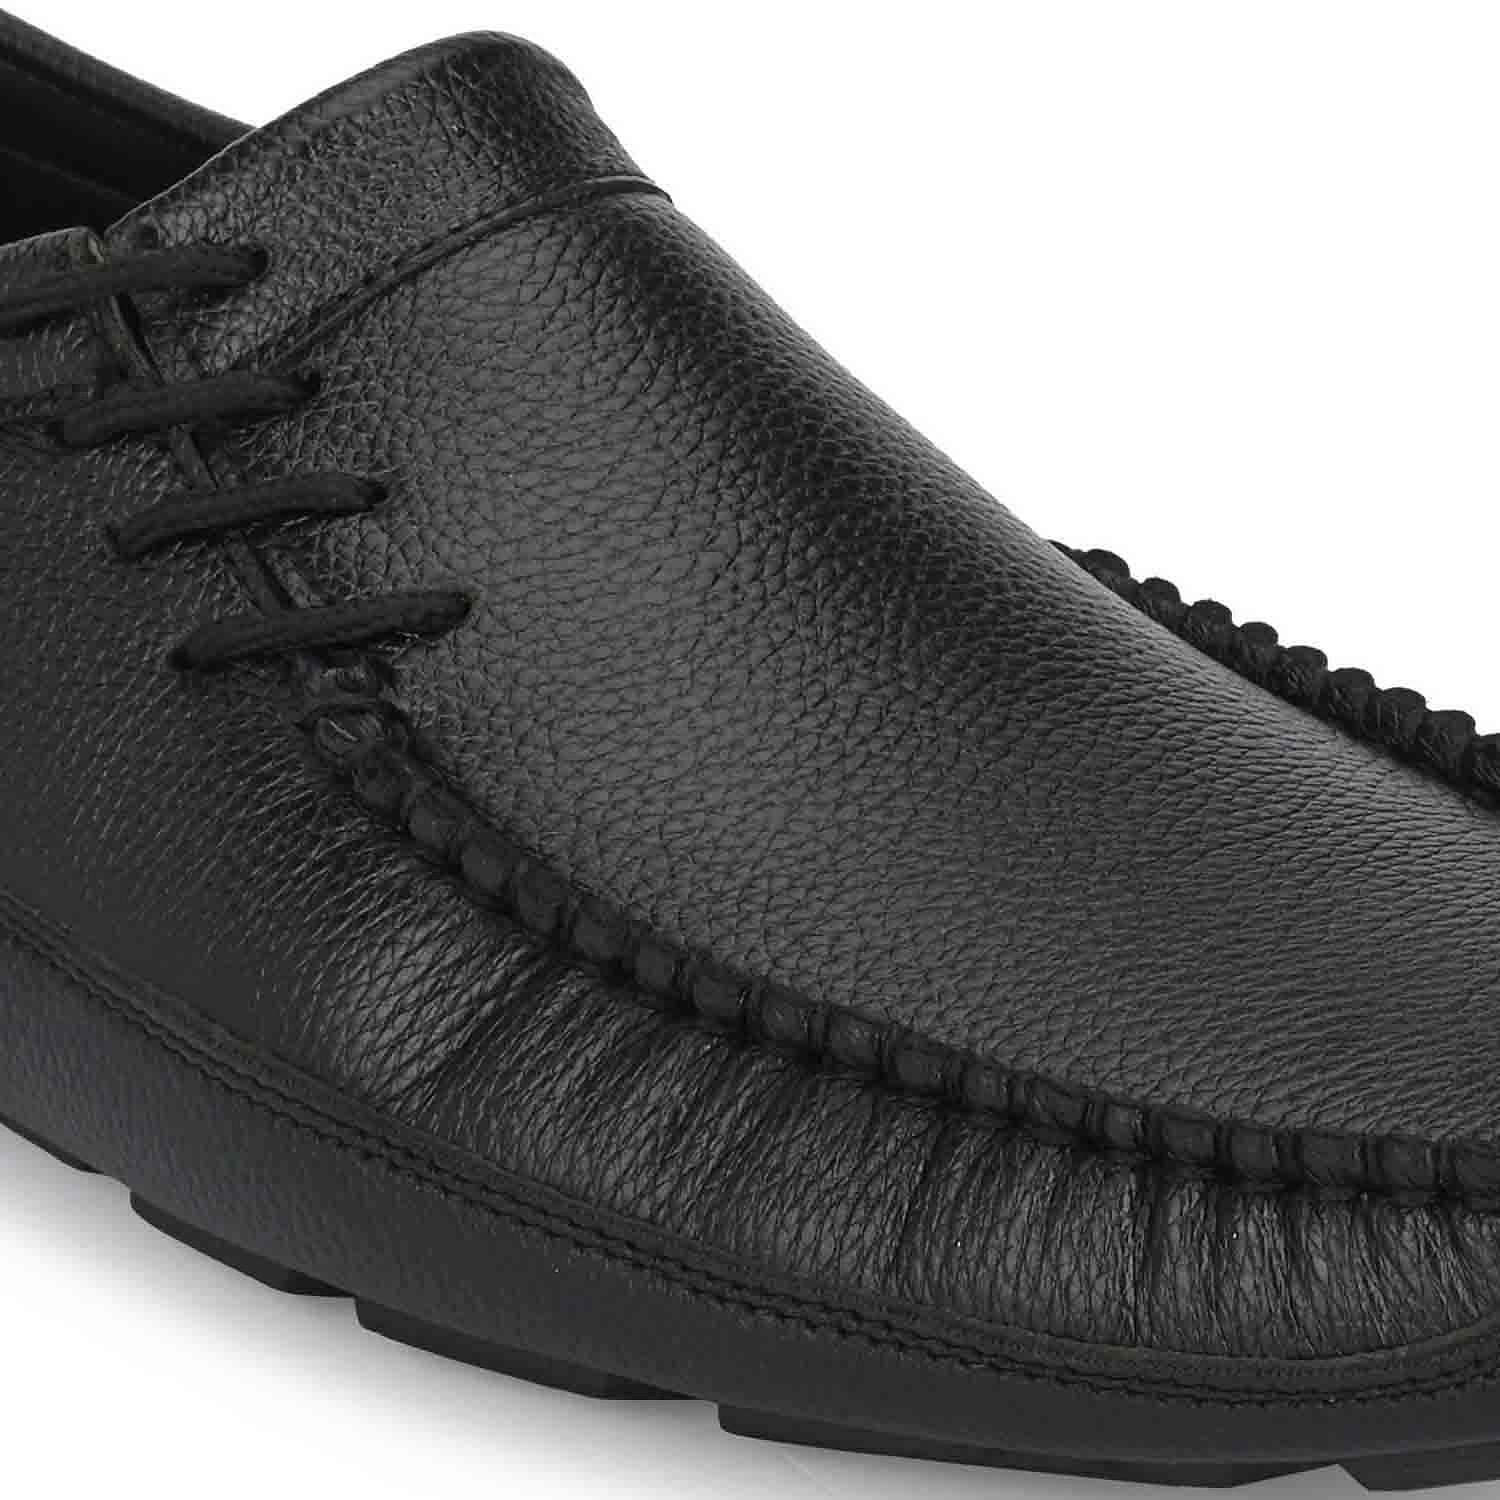 Pair-it Men's Loafers Shoes - Black-LZ-Loafer113